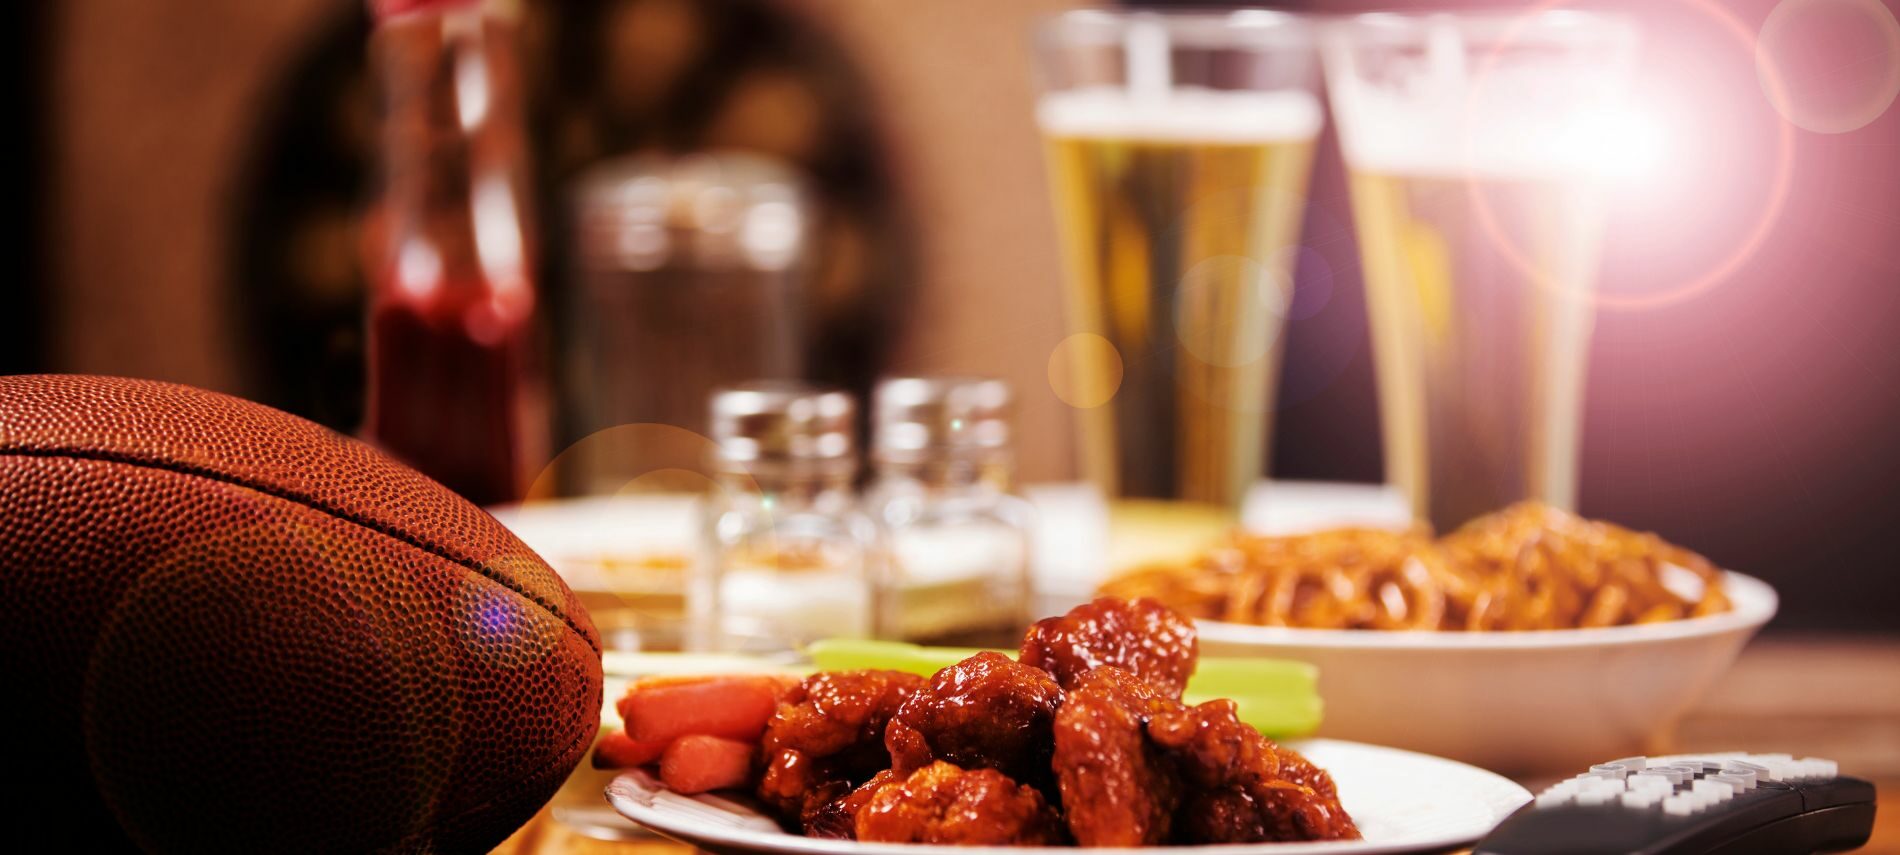 Plate of wings next to a football, with onion rings, and two beers